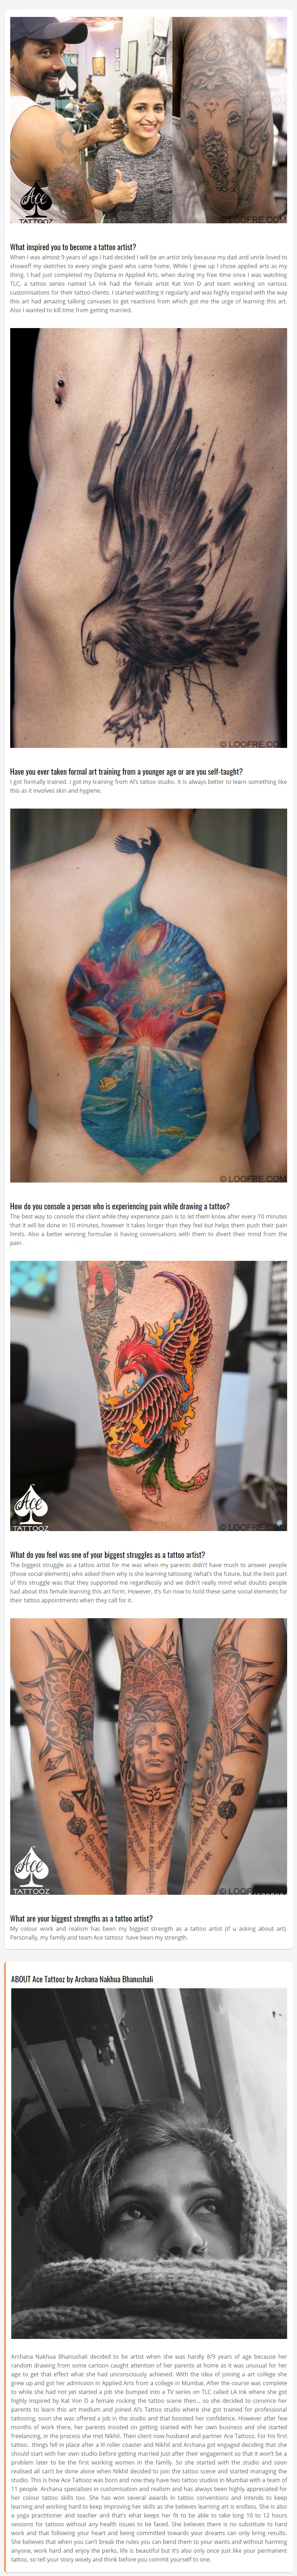 Inspiring Stories of Professionals Grouped by Tags  Tattoo Art  Workmob